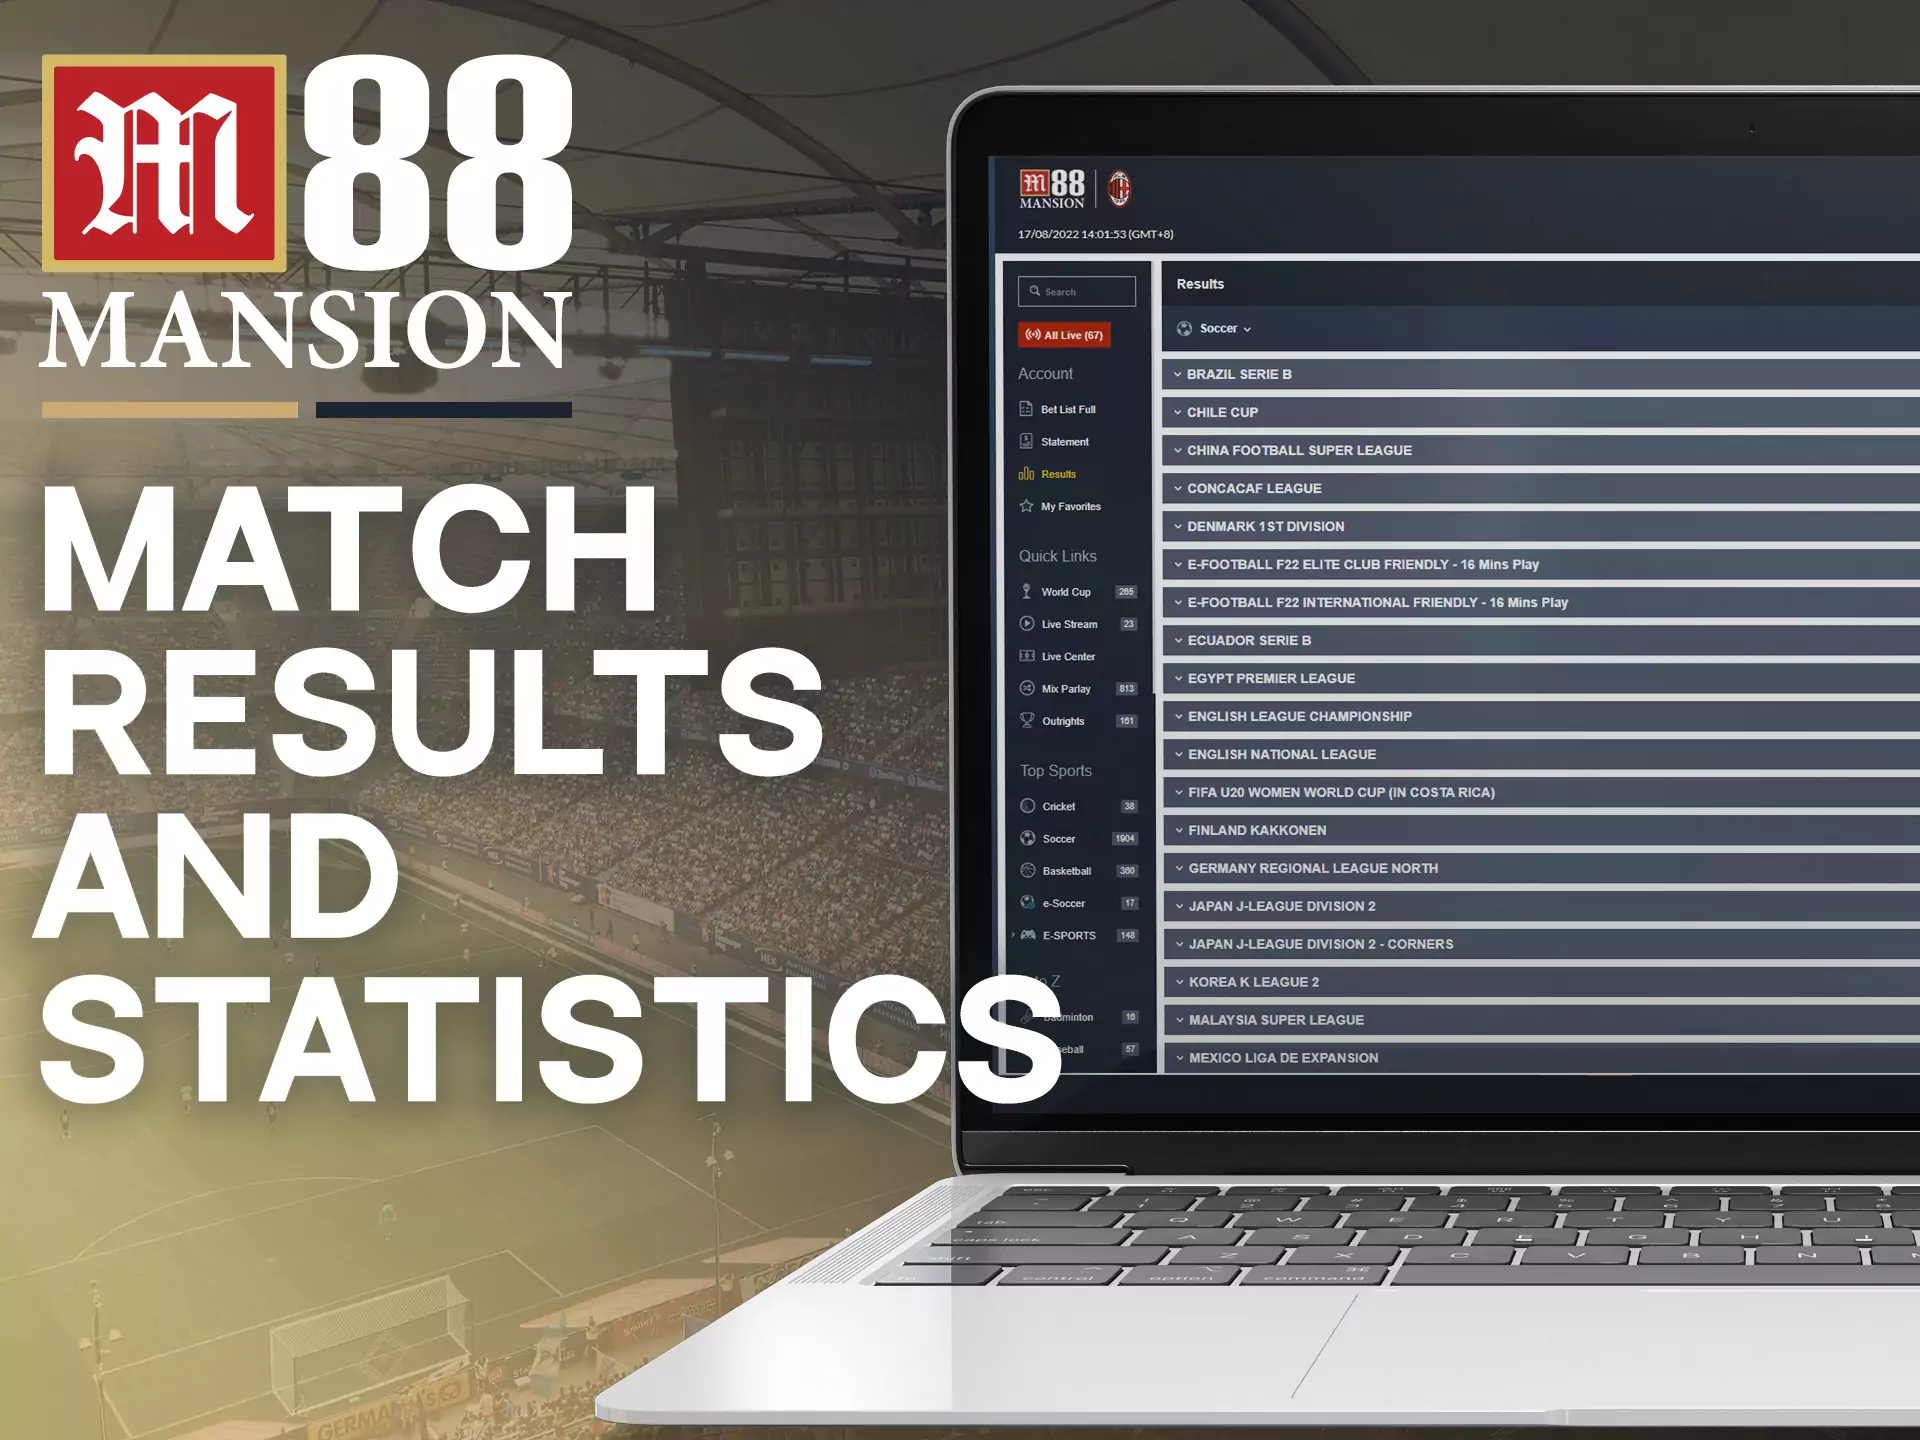 After a match, you can check the results right on the M88 website.